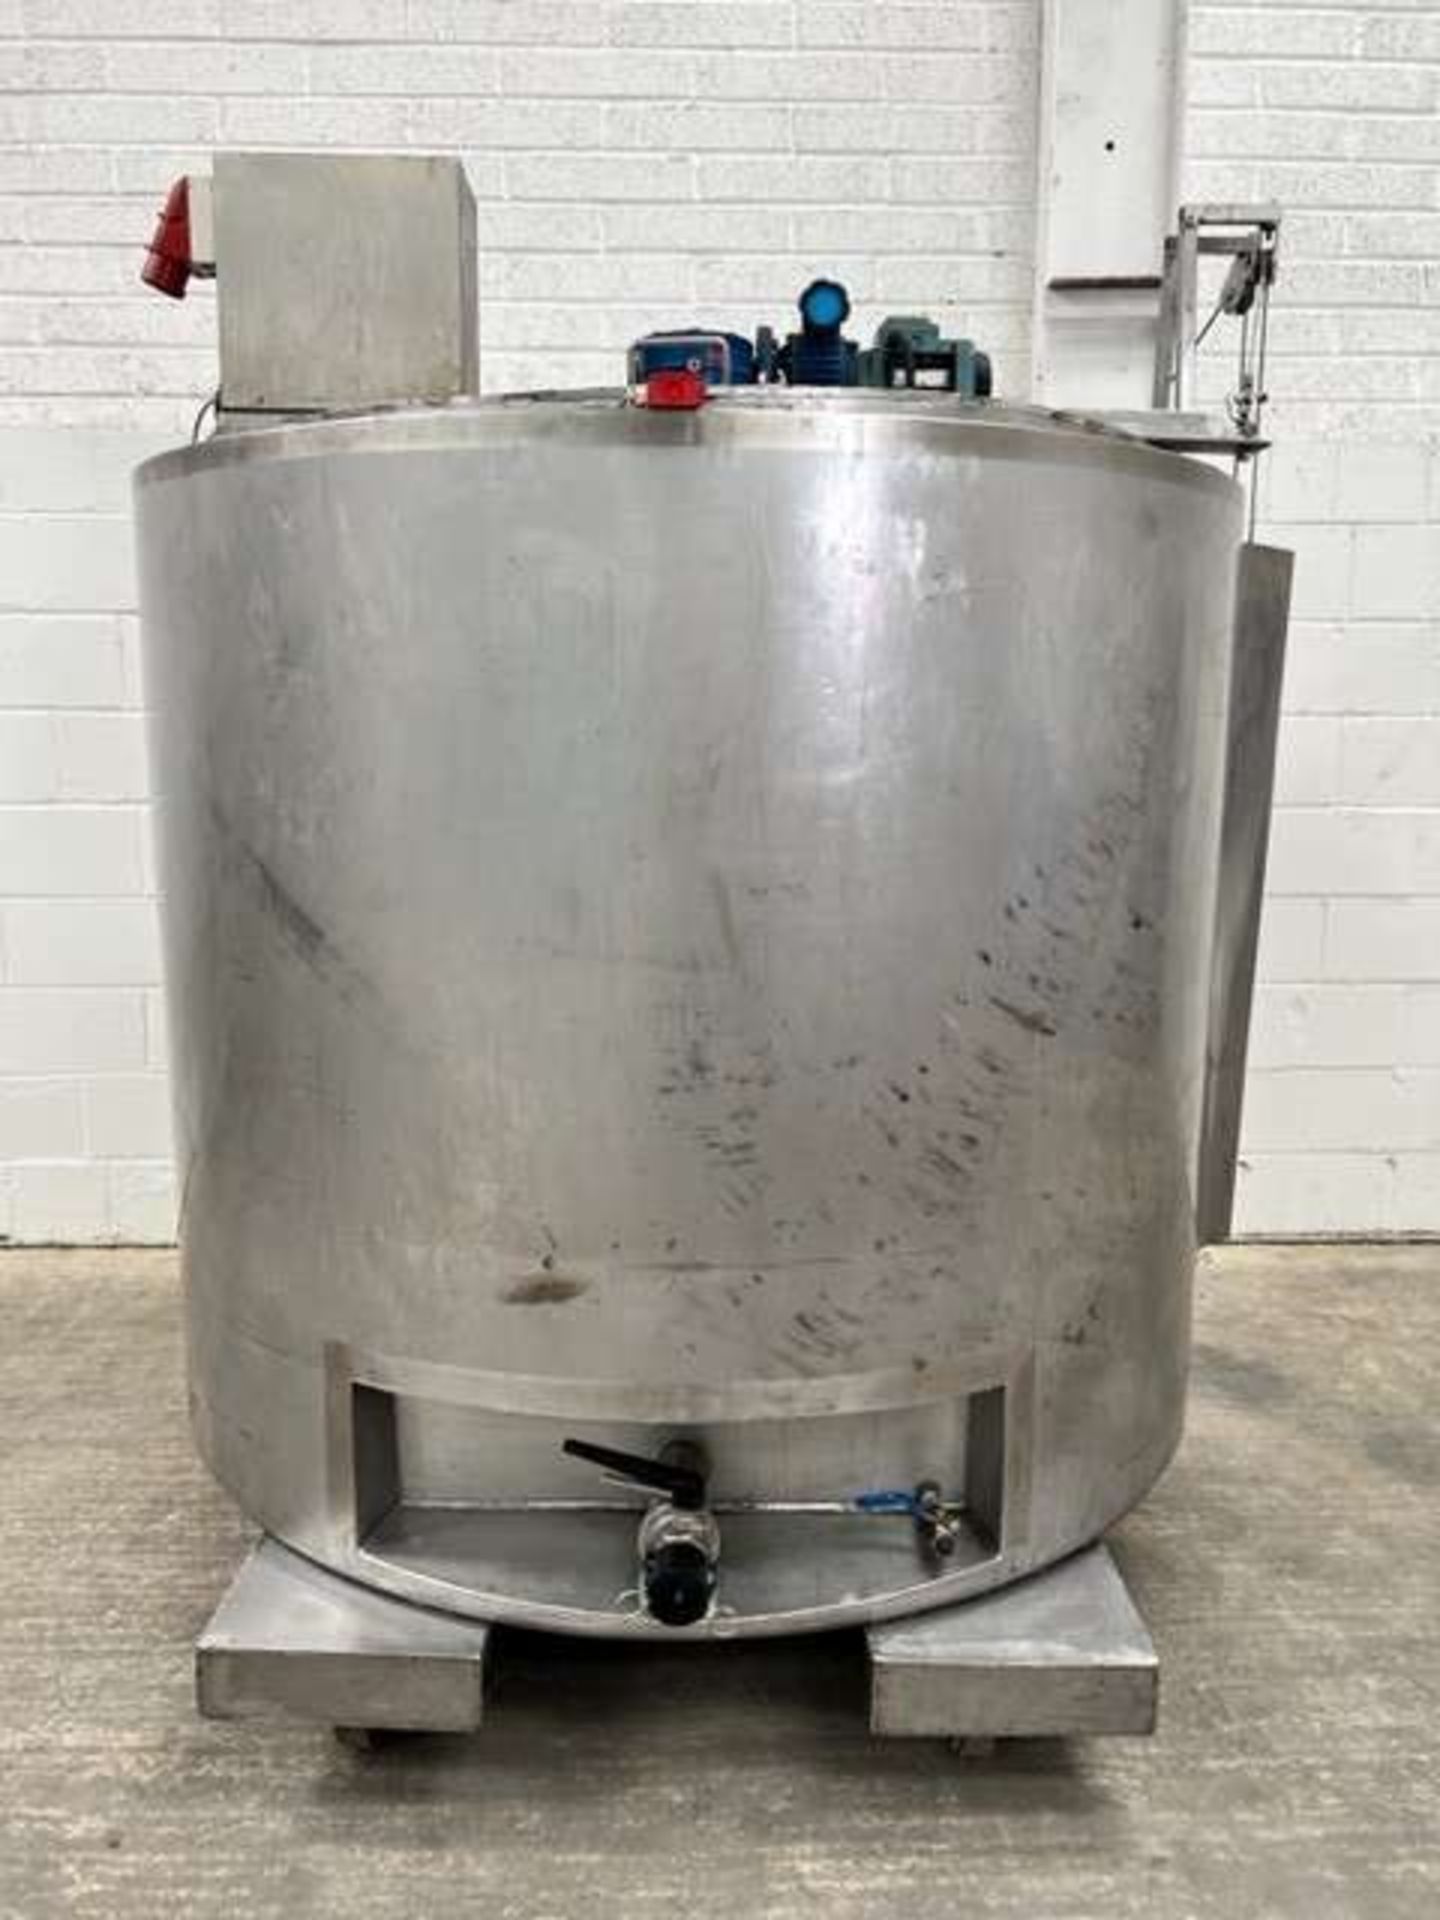 600 Litre Top Entry Electrically Heated Jacketed Vessel